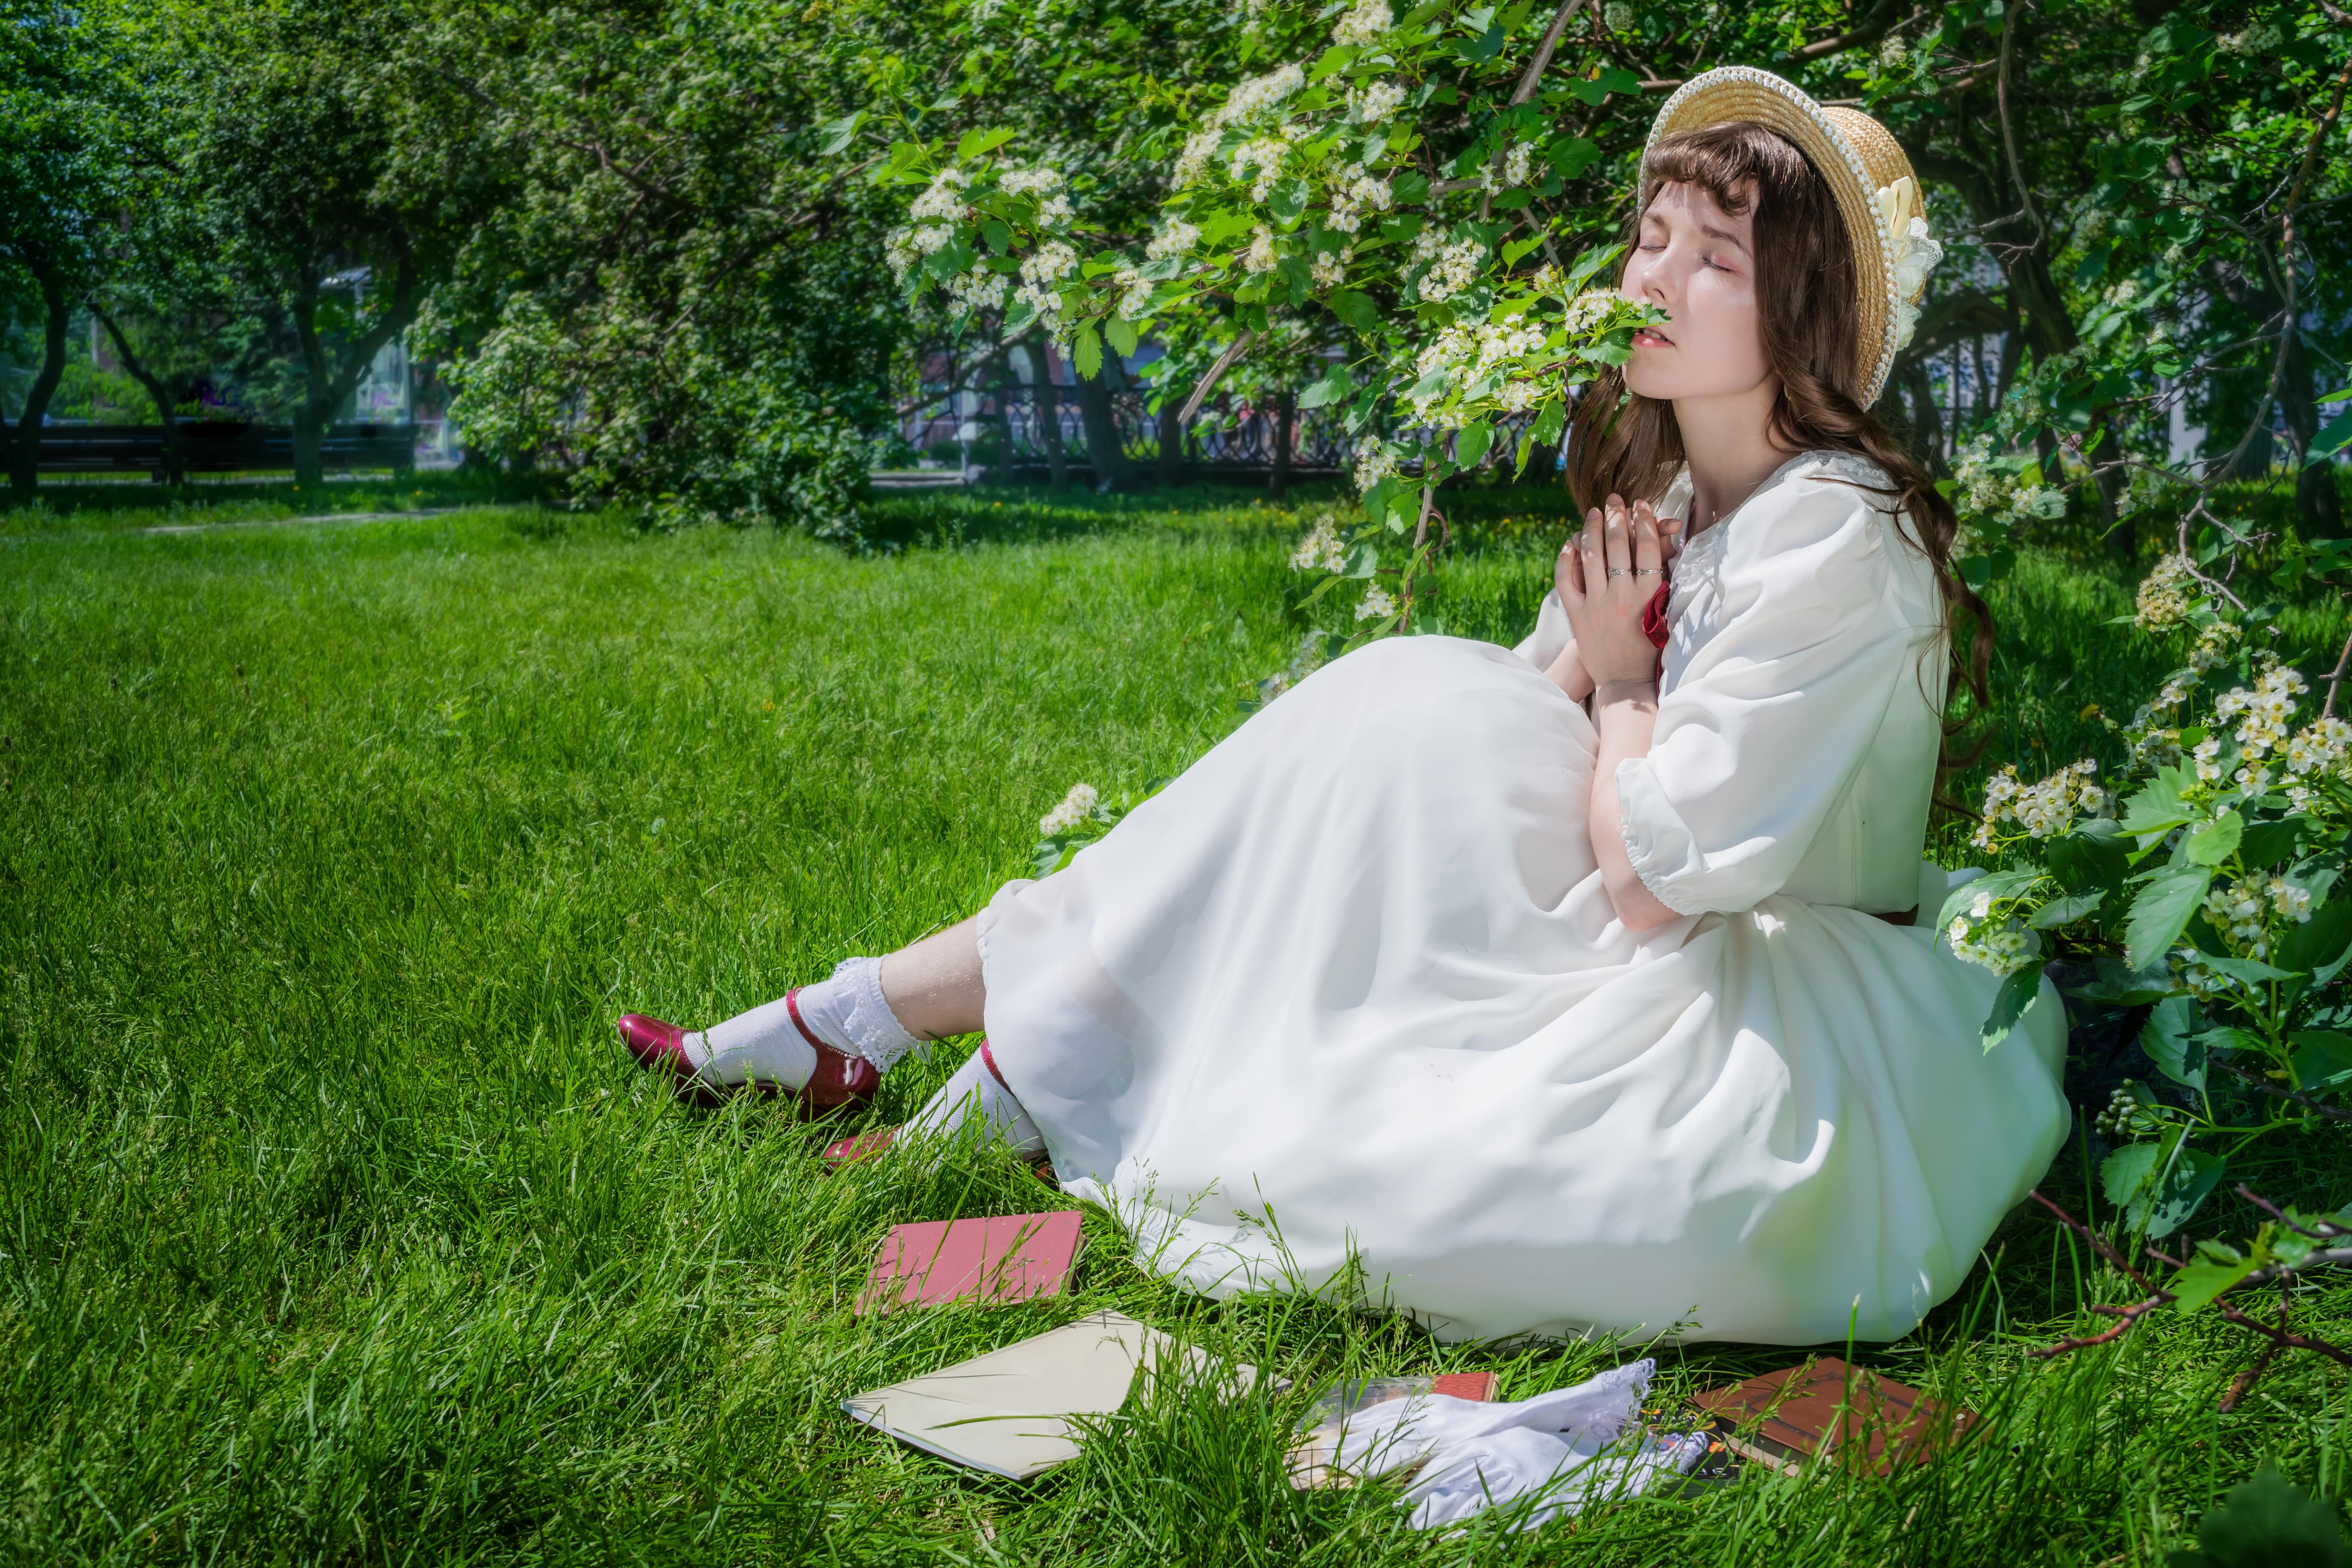 Nice girl in a white dress sits on a lawn in a park